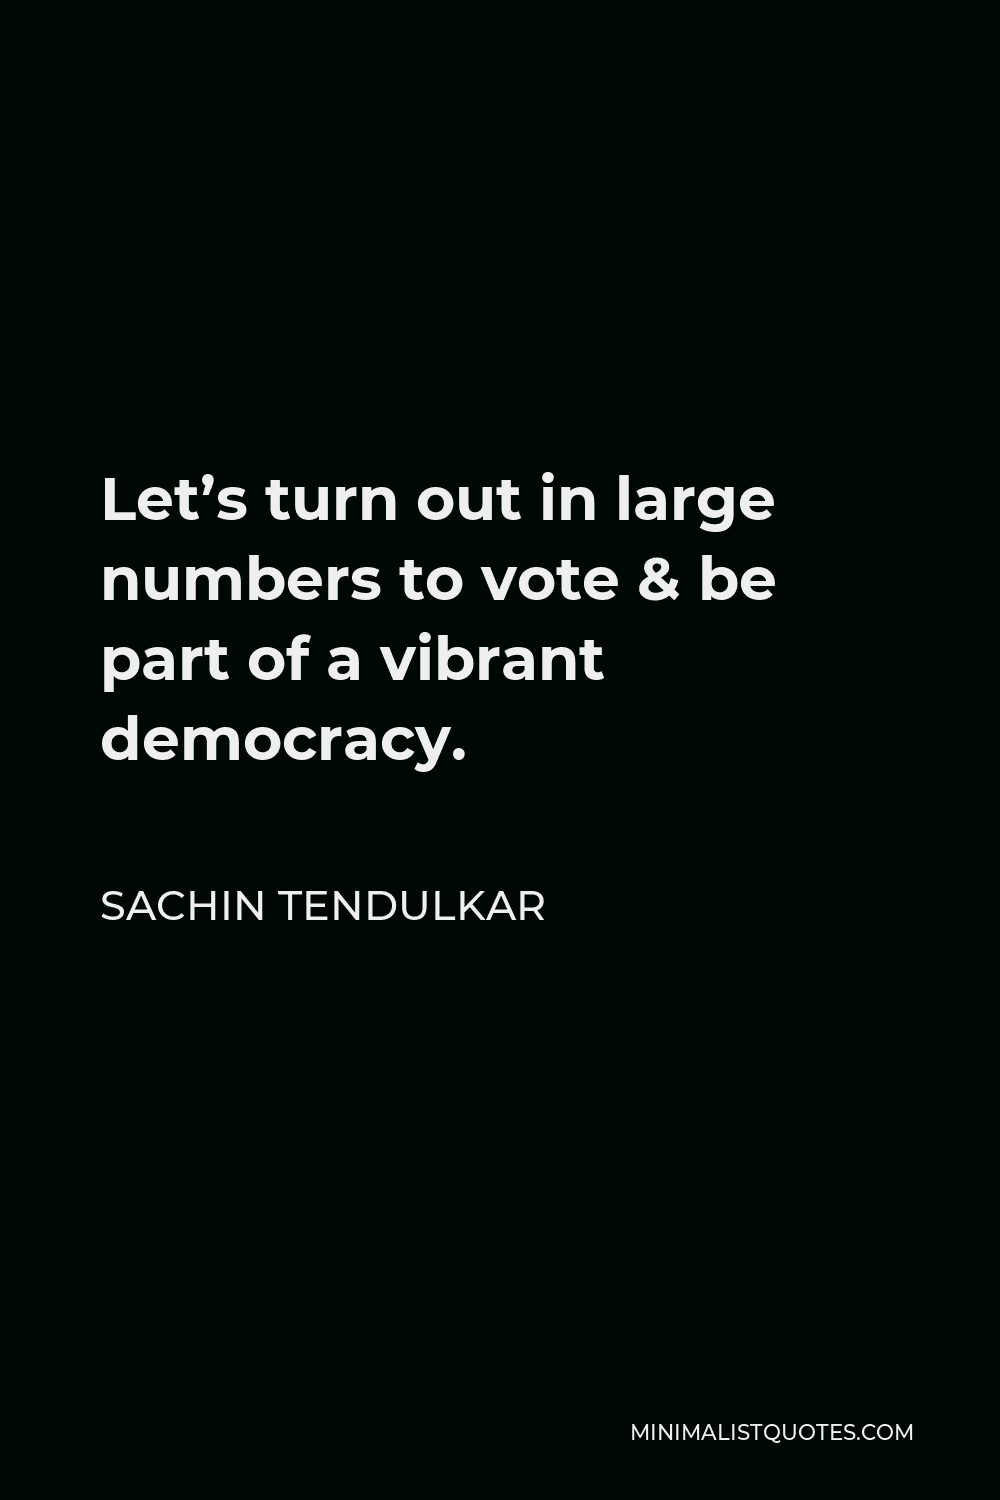 Sachin Tendulkar Quote - Let’s turn out in large numbers to vote & be part of a vibrant democracy.